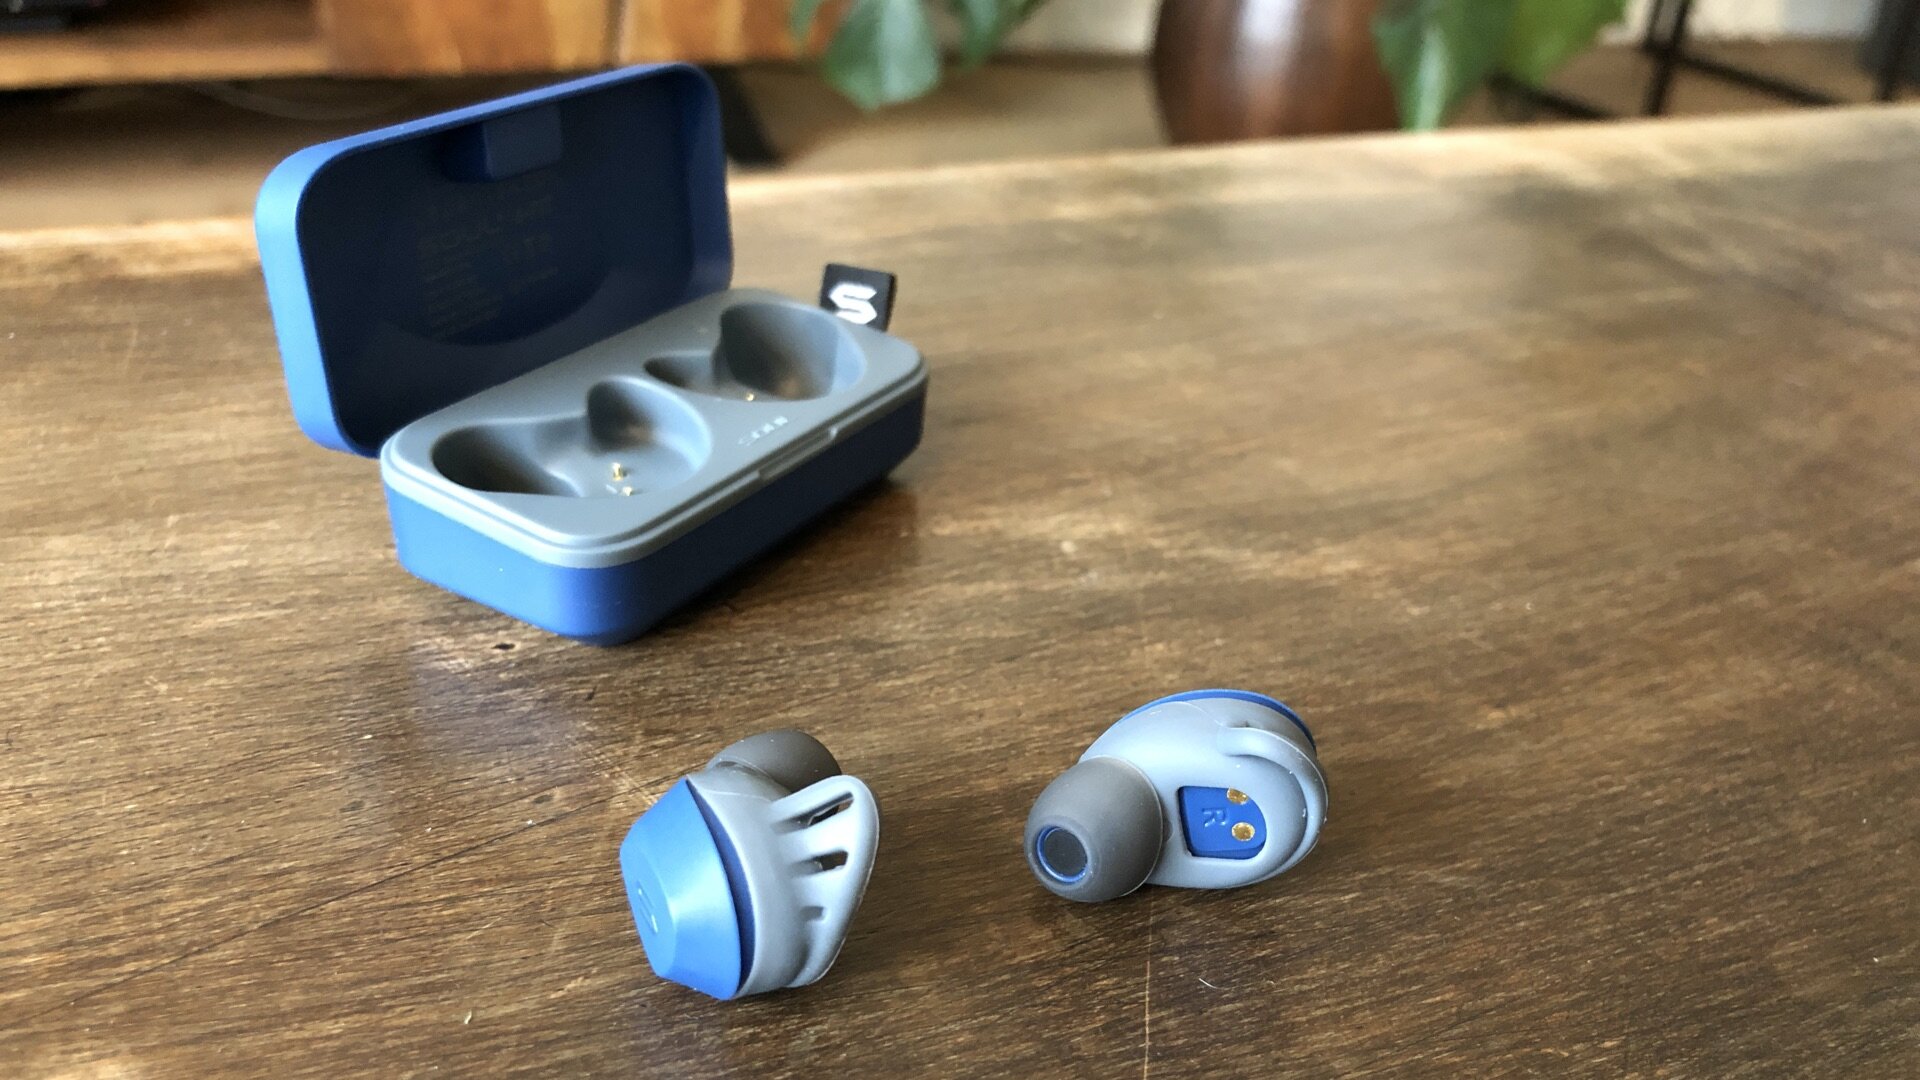 Soul S-Fit review: Sports earbuds with Transparency mode